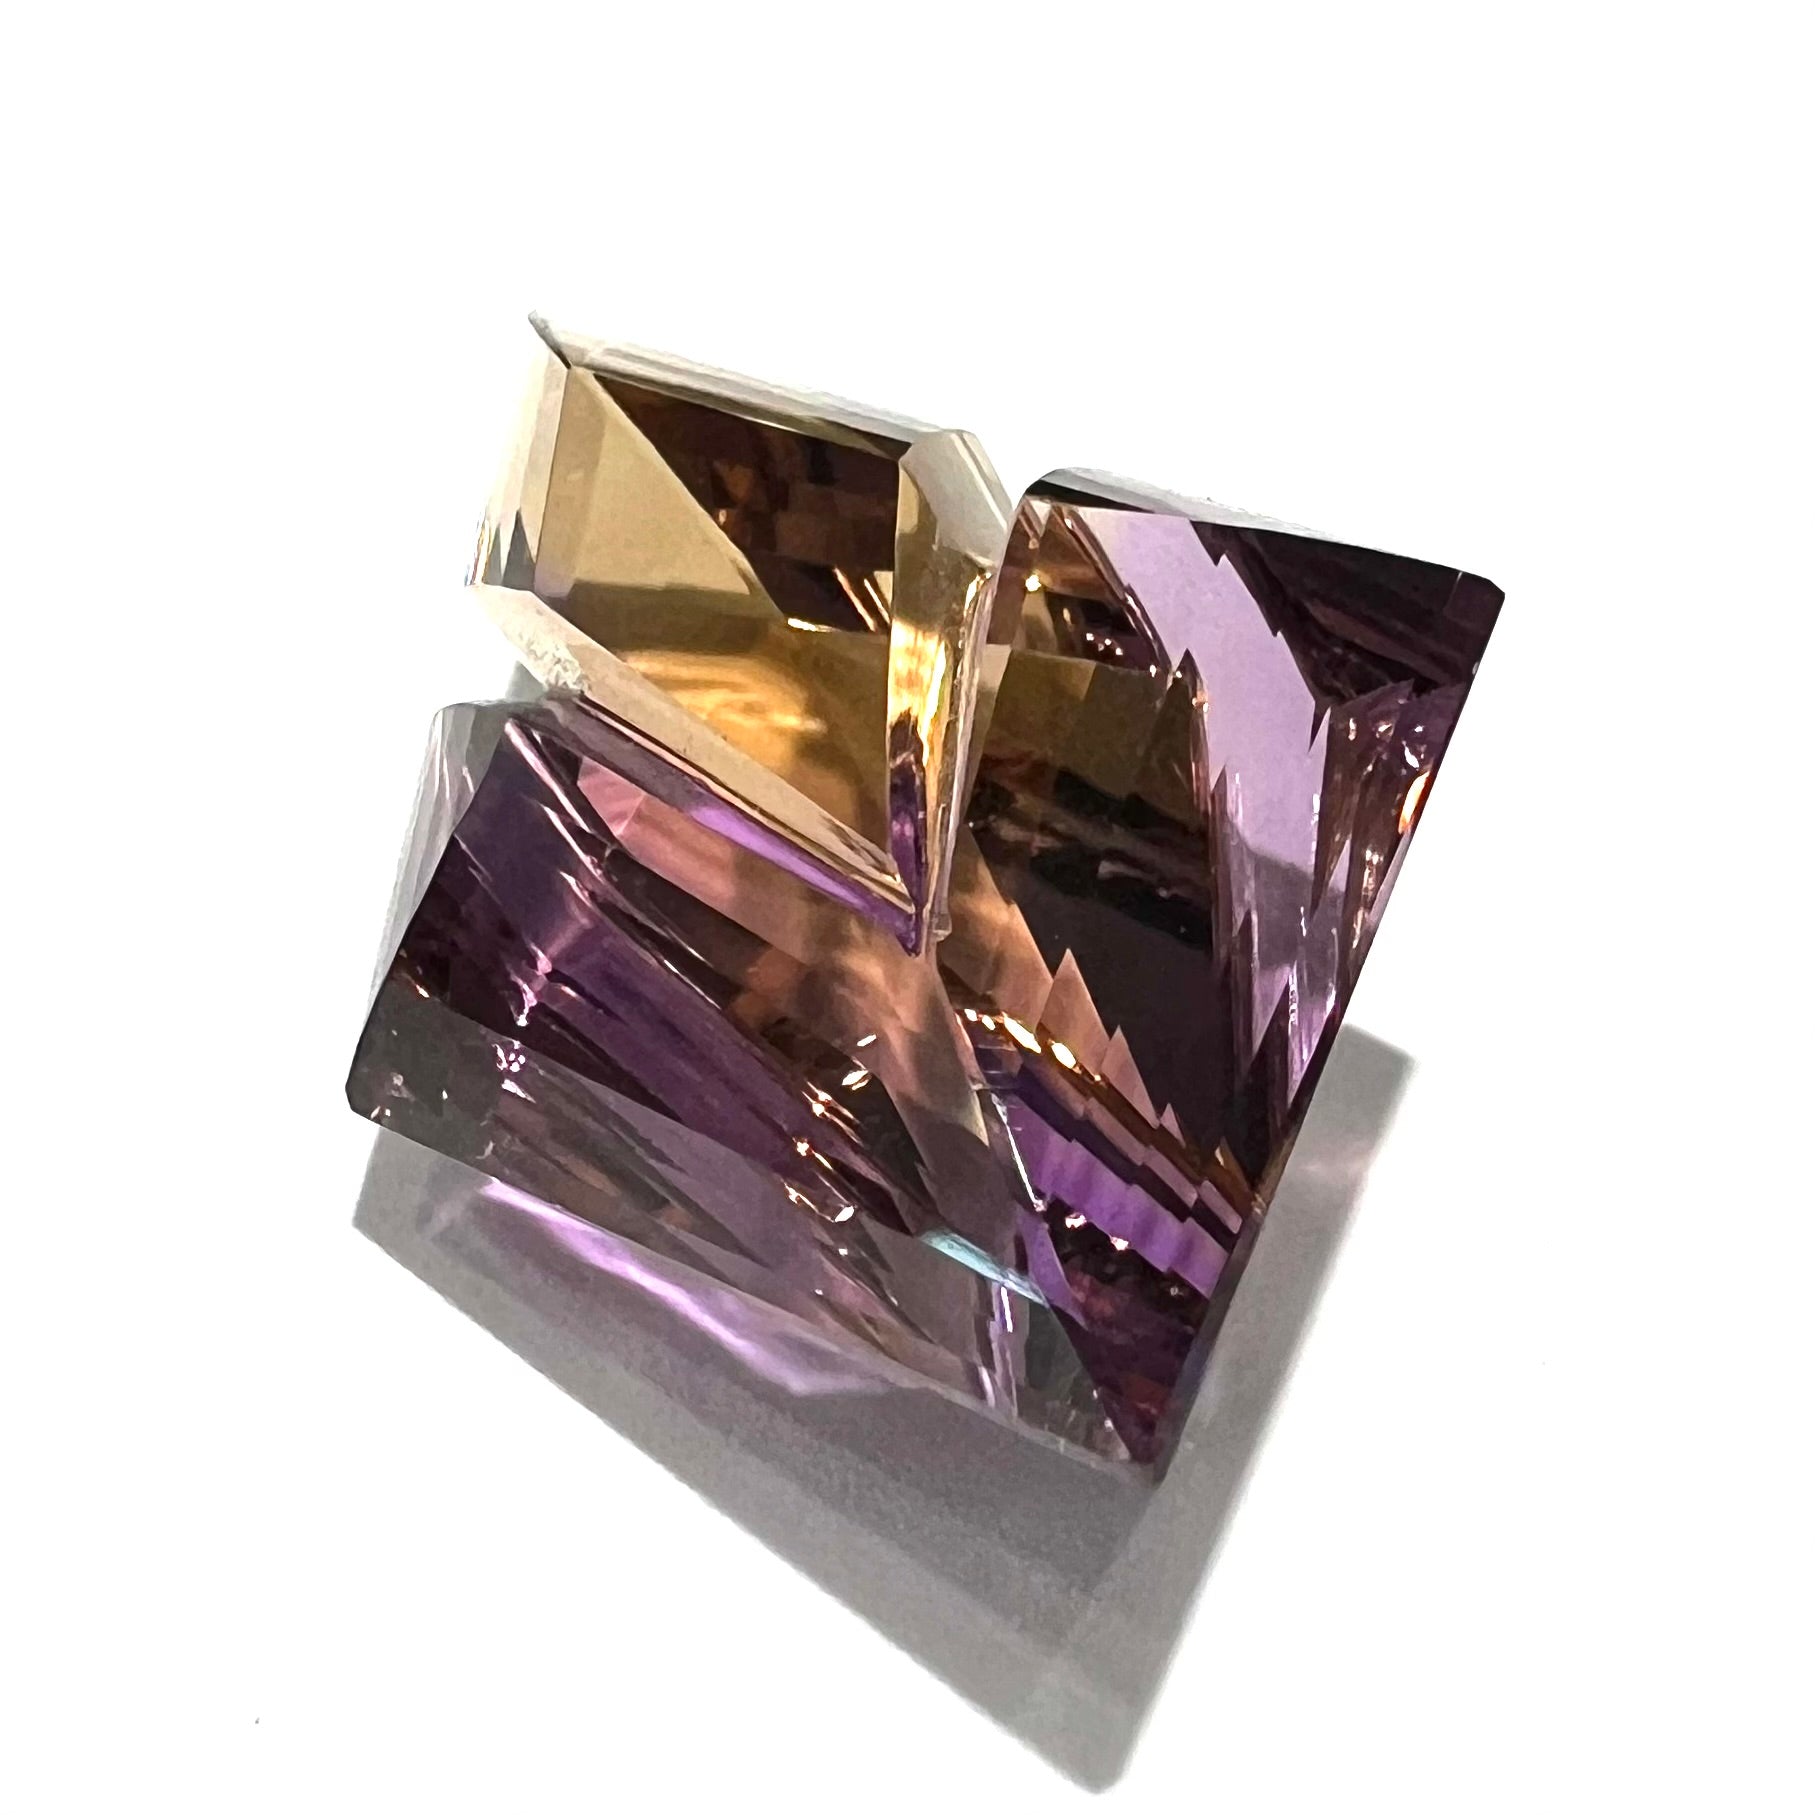 A loose, faceted fantasy cut ametrine gemstone cut by famous carver, Arthur Lee Anderson.